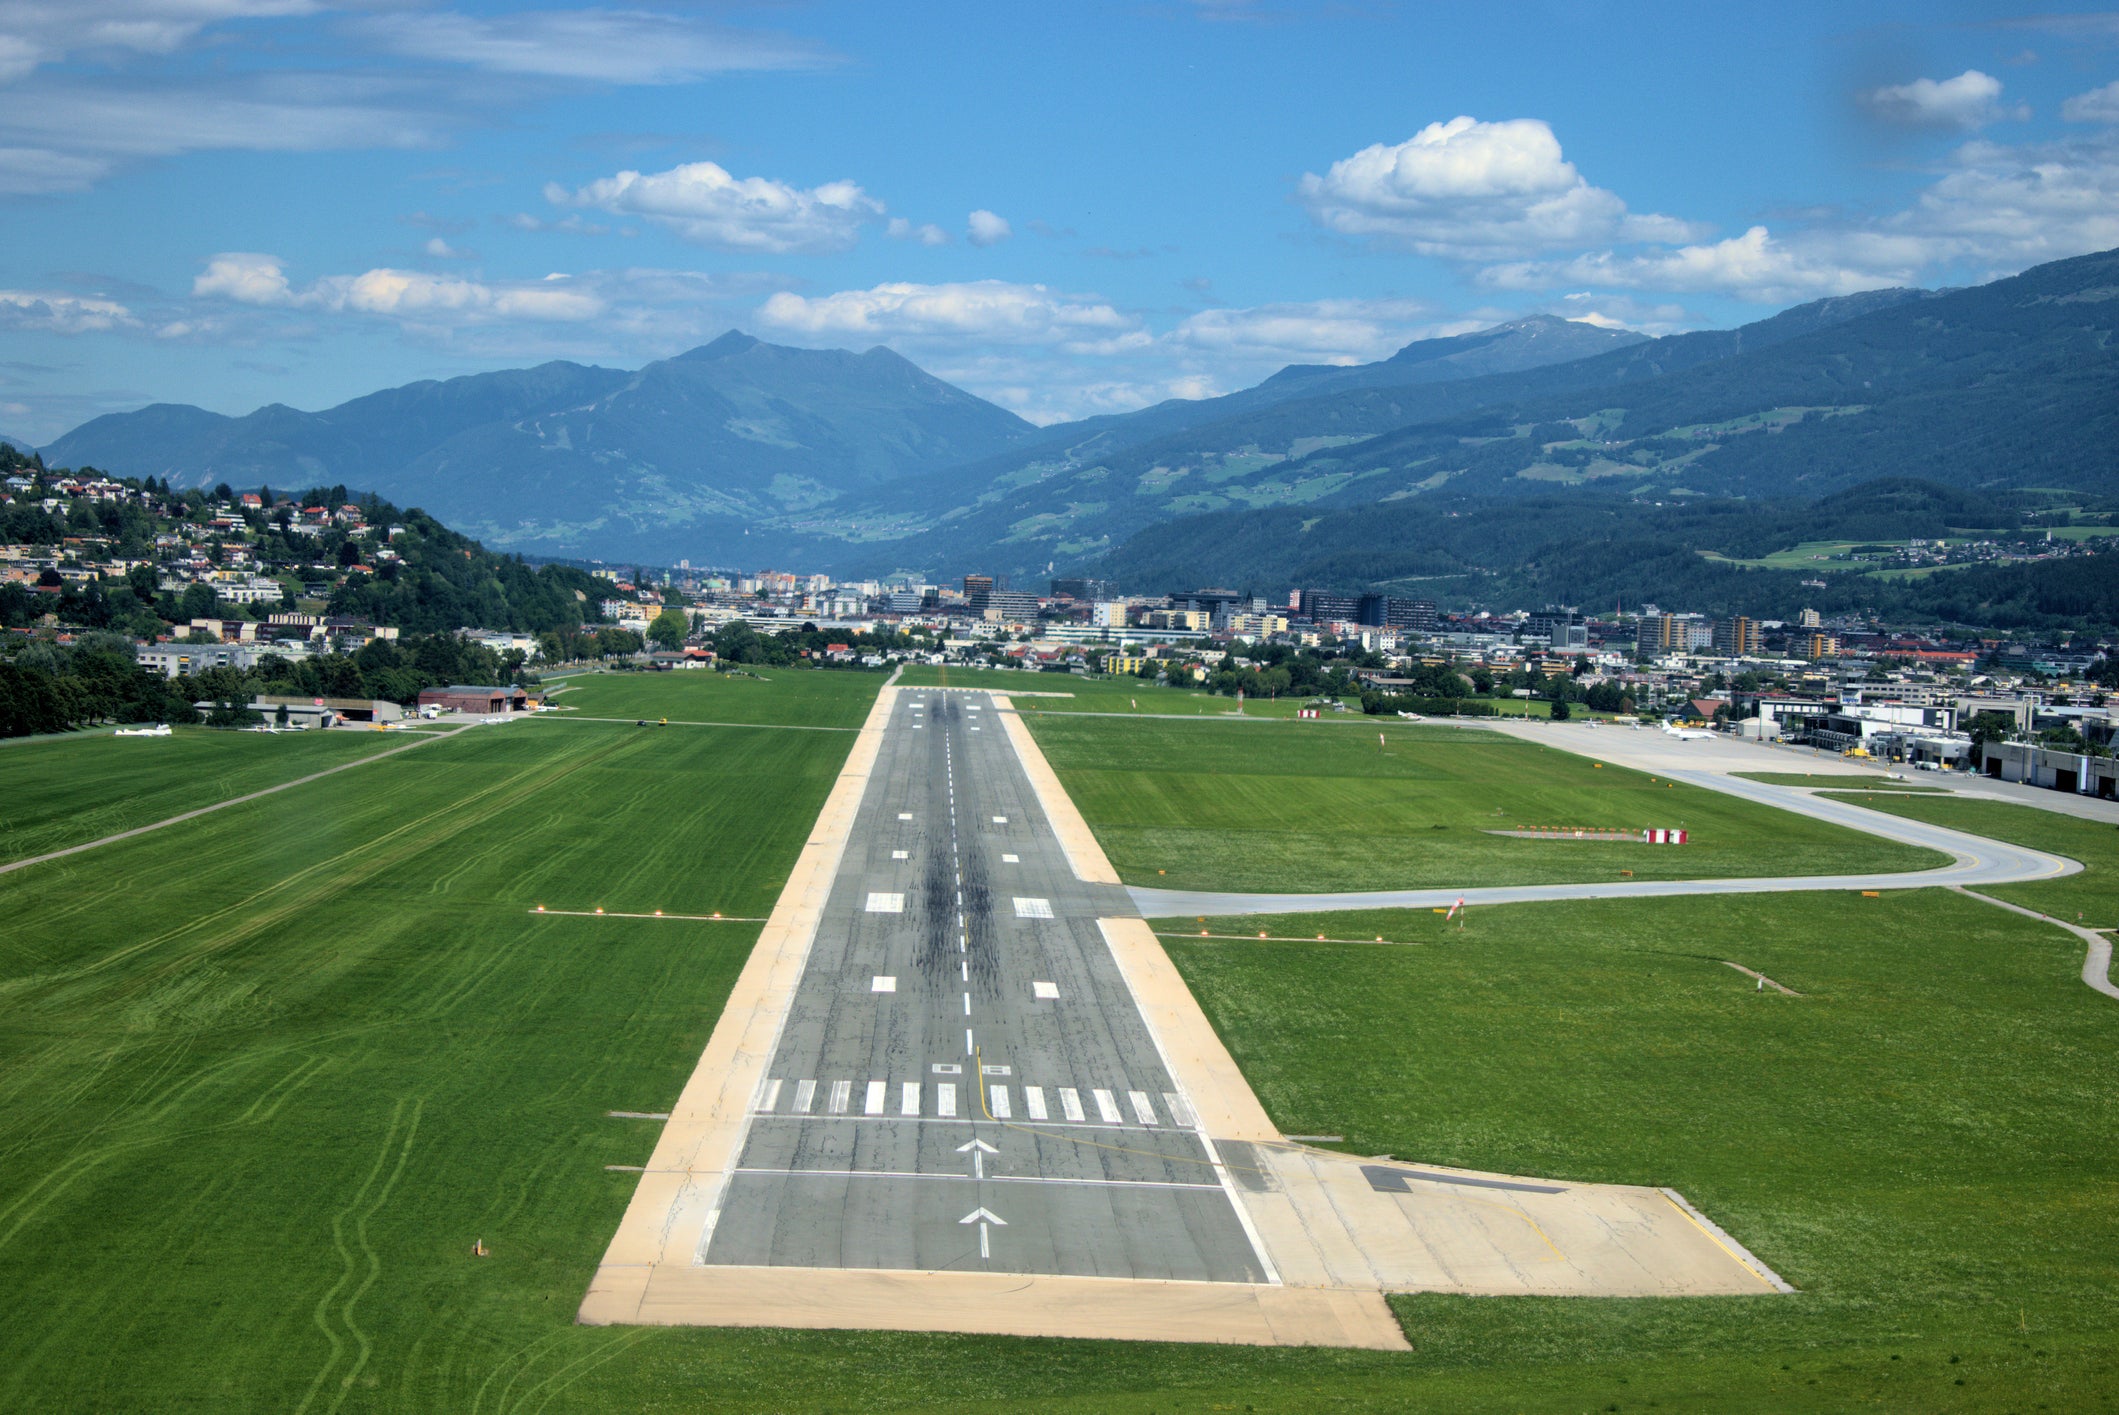 Few airports in Europe are set in as stunning a location as Innsbruck